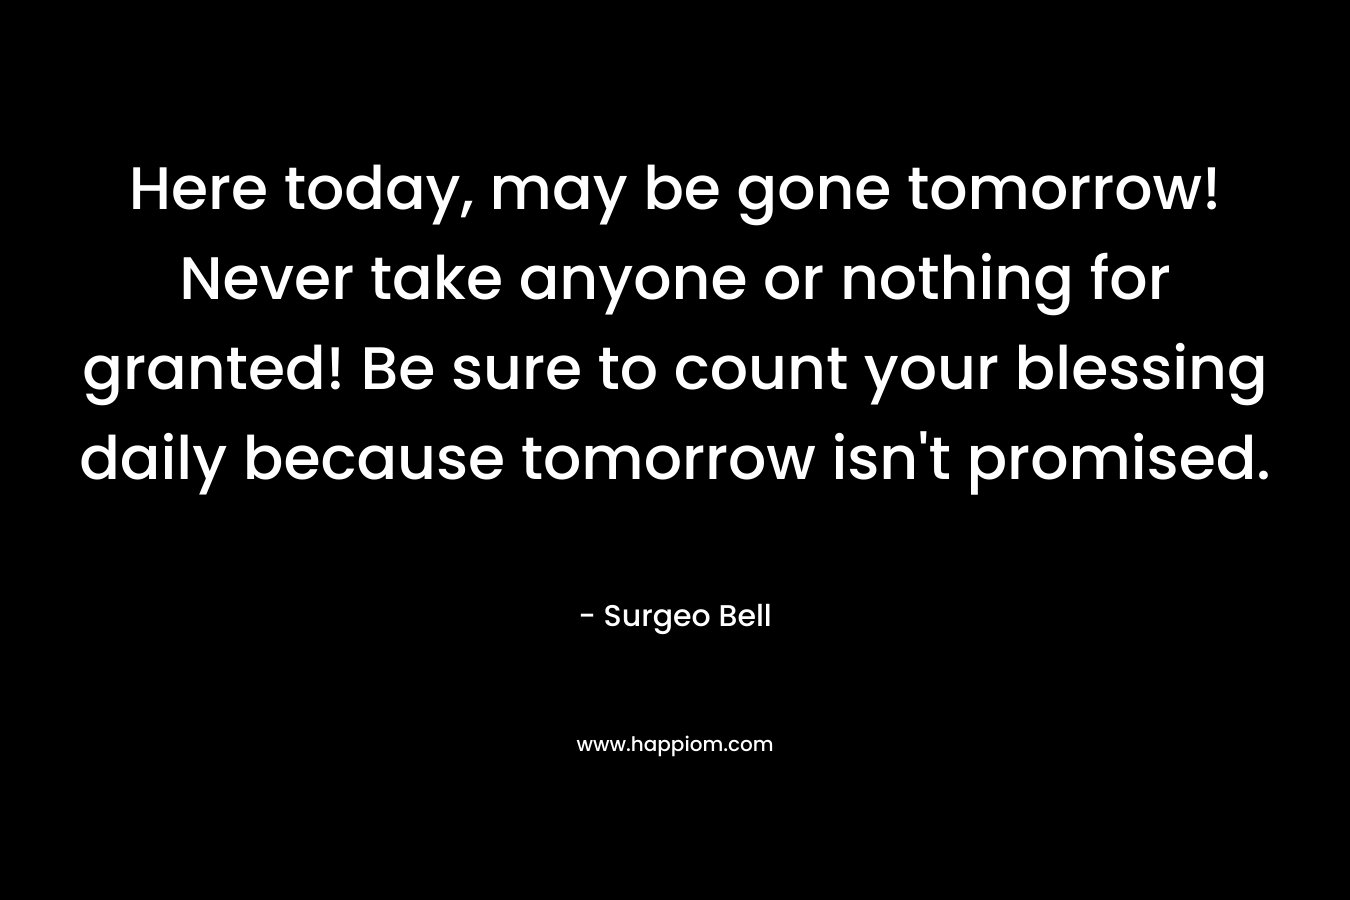 Here today, may be gone tomorrow! Never take anyone or nothing for granted! Be sure to count your blessing daily because tomorrow isn't promised.